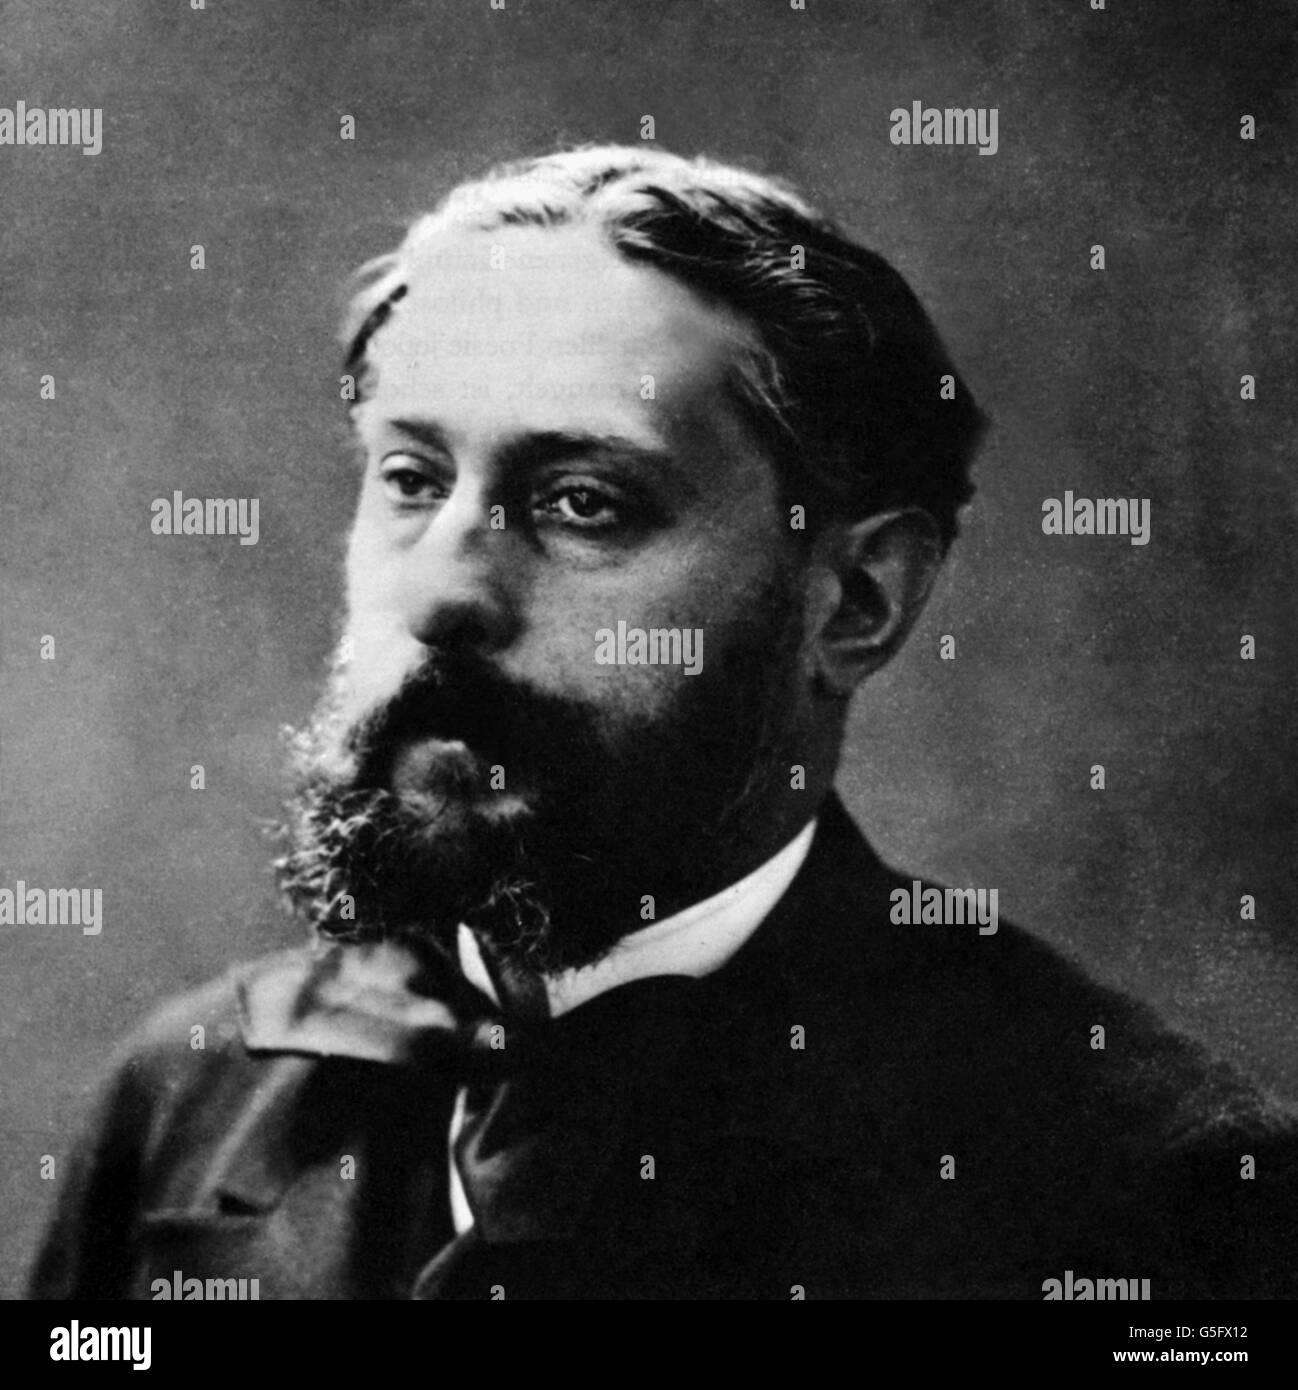 Sully Prudhomme, Rene, 16.3.1839 - 7.9.1907, French author / writer, Nobel Prize for literature 1901, portrait, circa 1900, Stock Photo